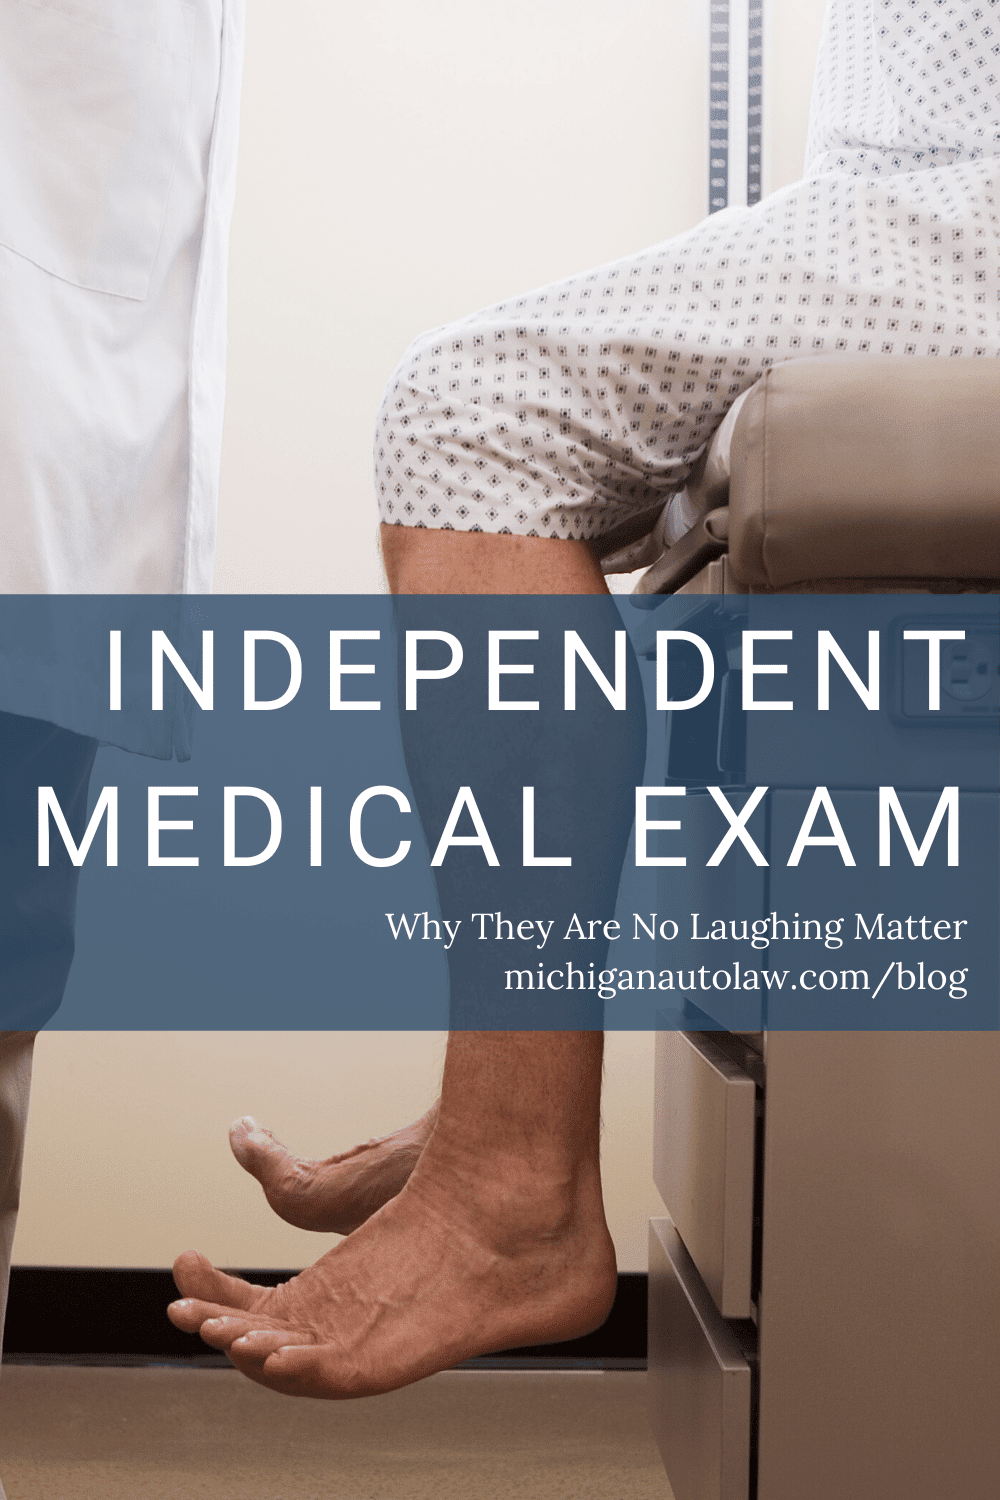 Independent Medical Examination (IME): Why They Are No Laughing Matter